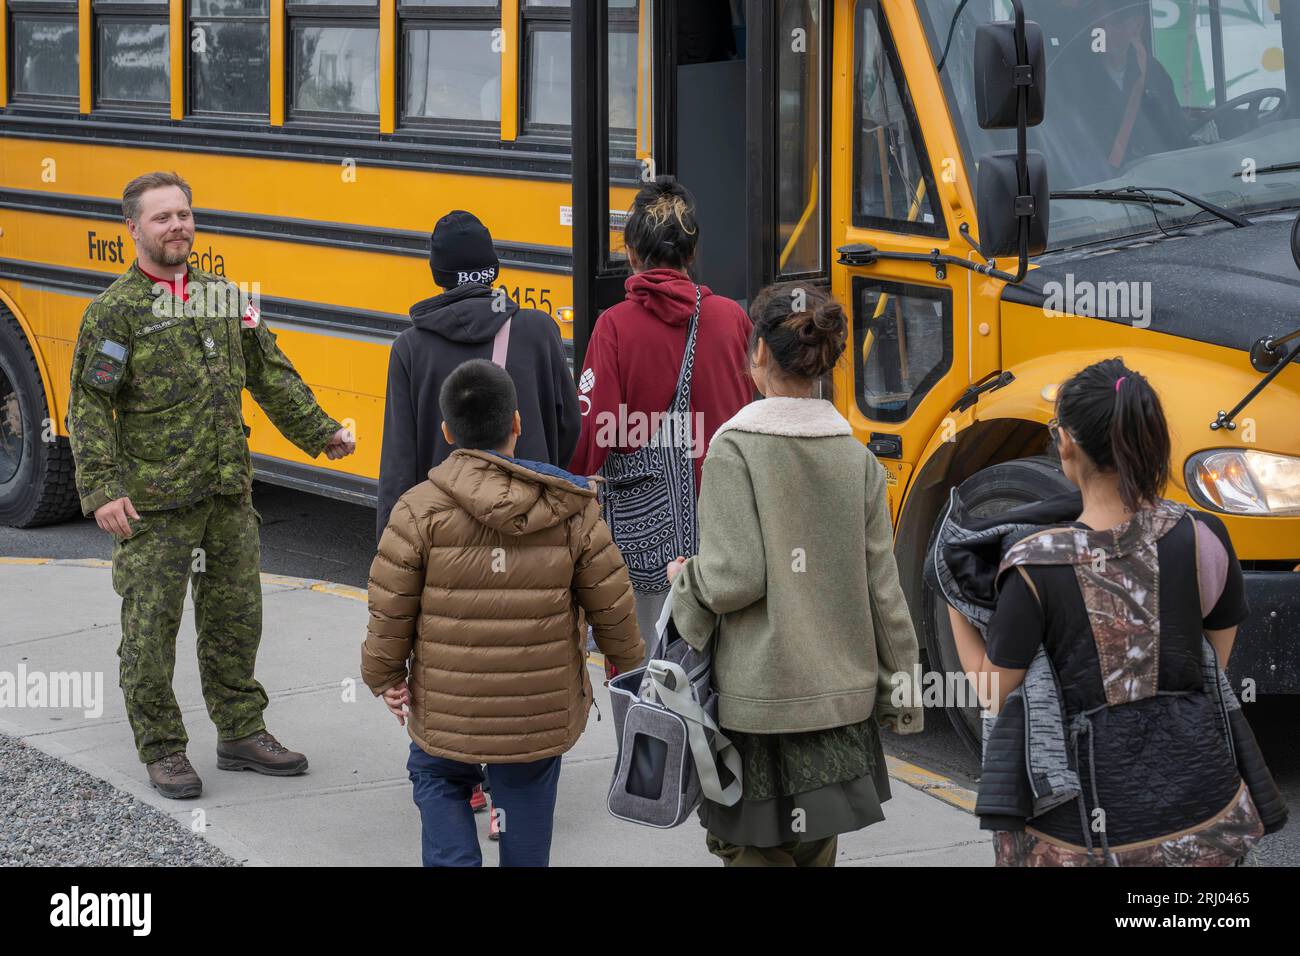 (230820) -- NORTHWEST TERRITORIES, Aug. 20, 2023 (Xinhua) -- A member of the Canadian Armed Forces directs people on to a bus destined for the Yellowknife airport in Yellowknife, Northwest Territories, Canada, on Aug. 18, 2023. The Canadian Armed Forces participated in an evacuation operation, helping residents out of Yellowknife as wildfires approached the city. (Canadian Armed Forces/Handout via Xinhua) Stock Photo